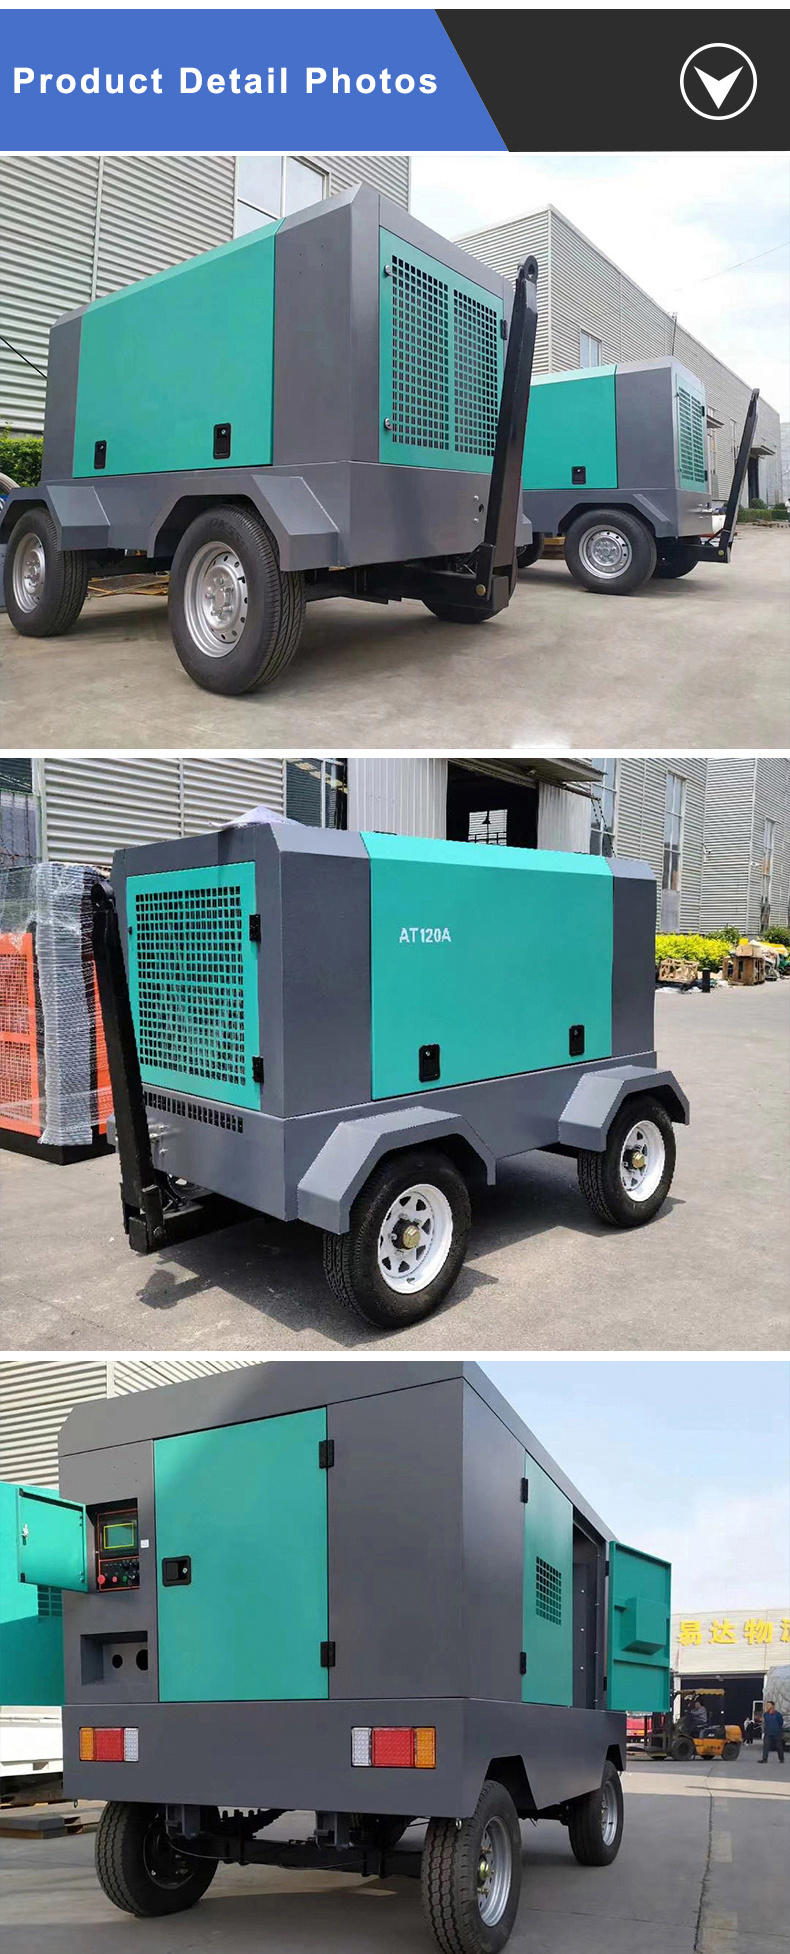 110kw 145HP Diesel Power Portable Screw Compressors 10bar Rotary Air Compressors